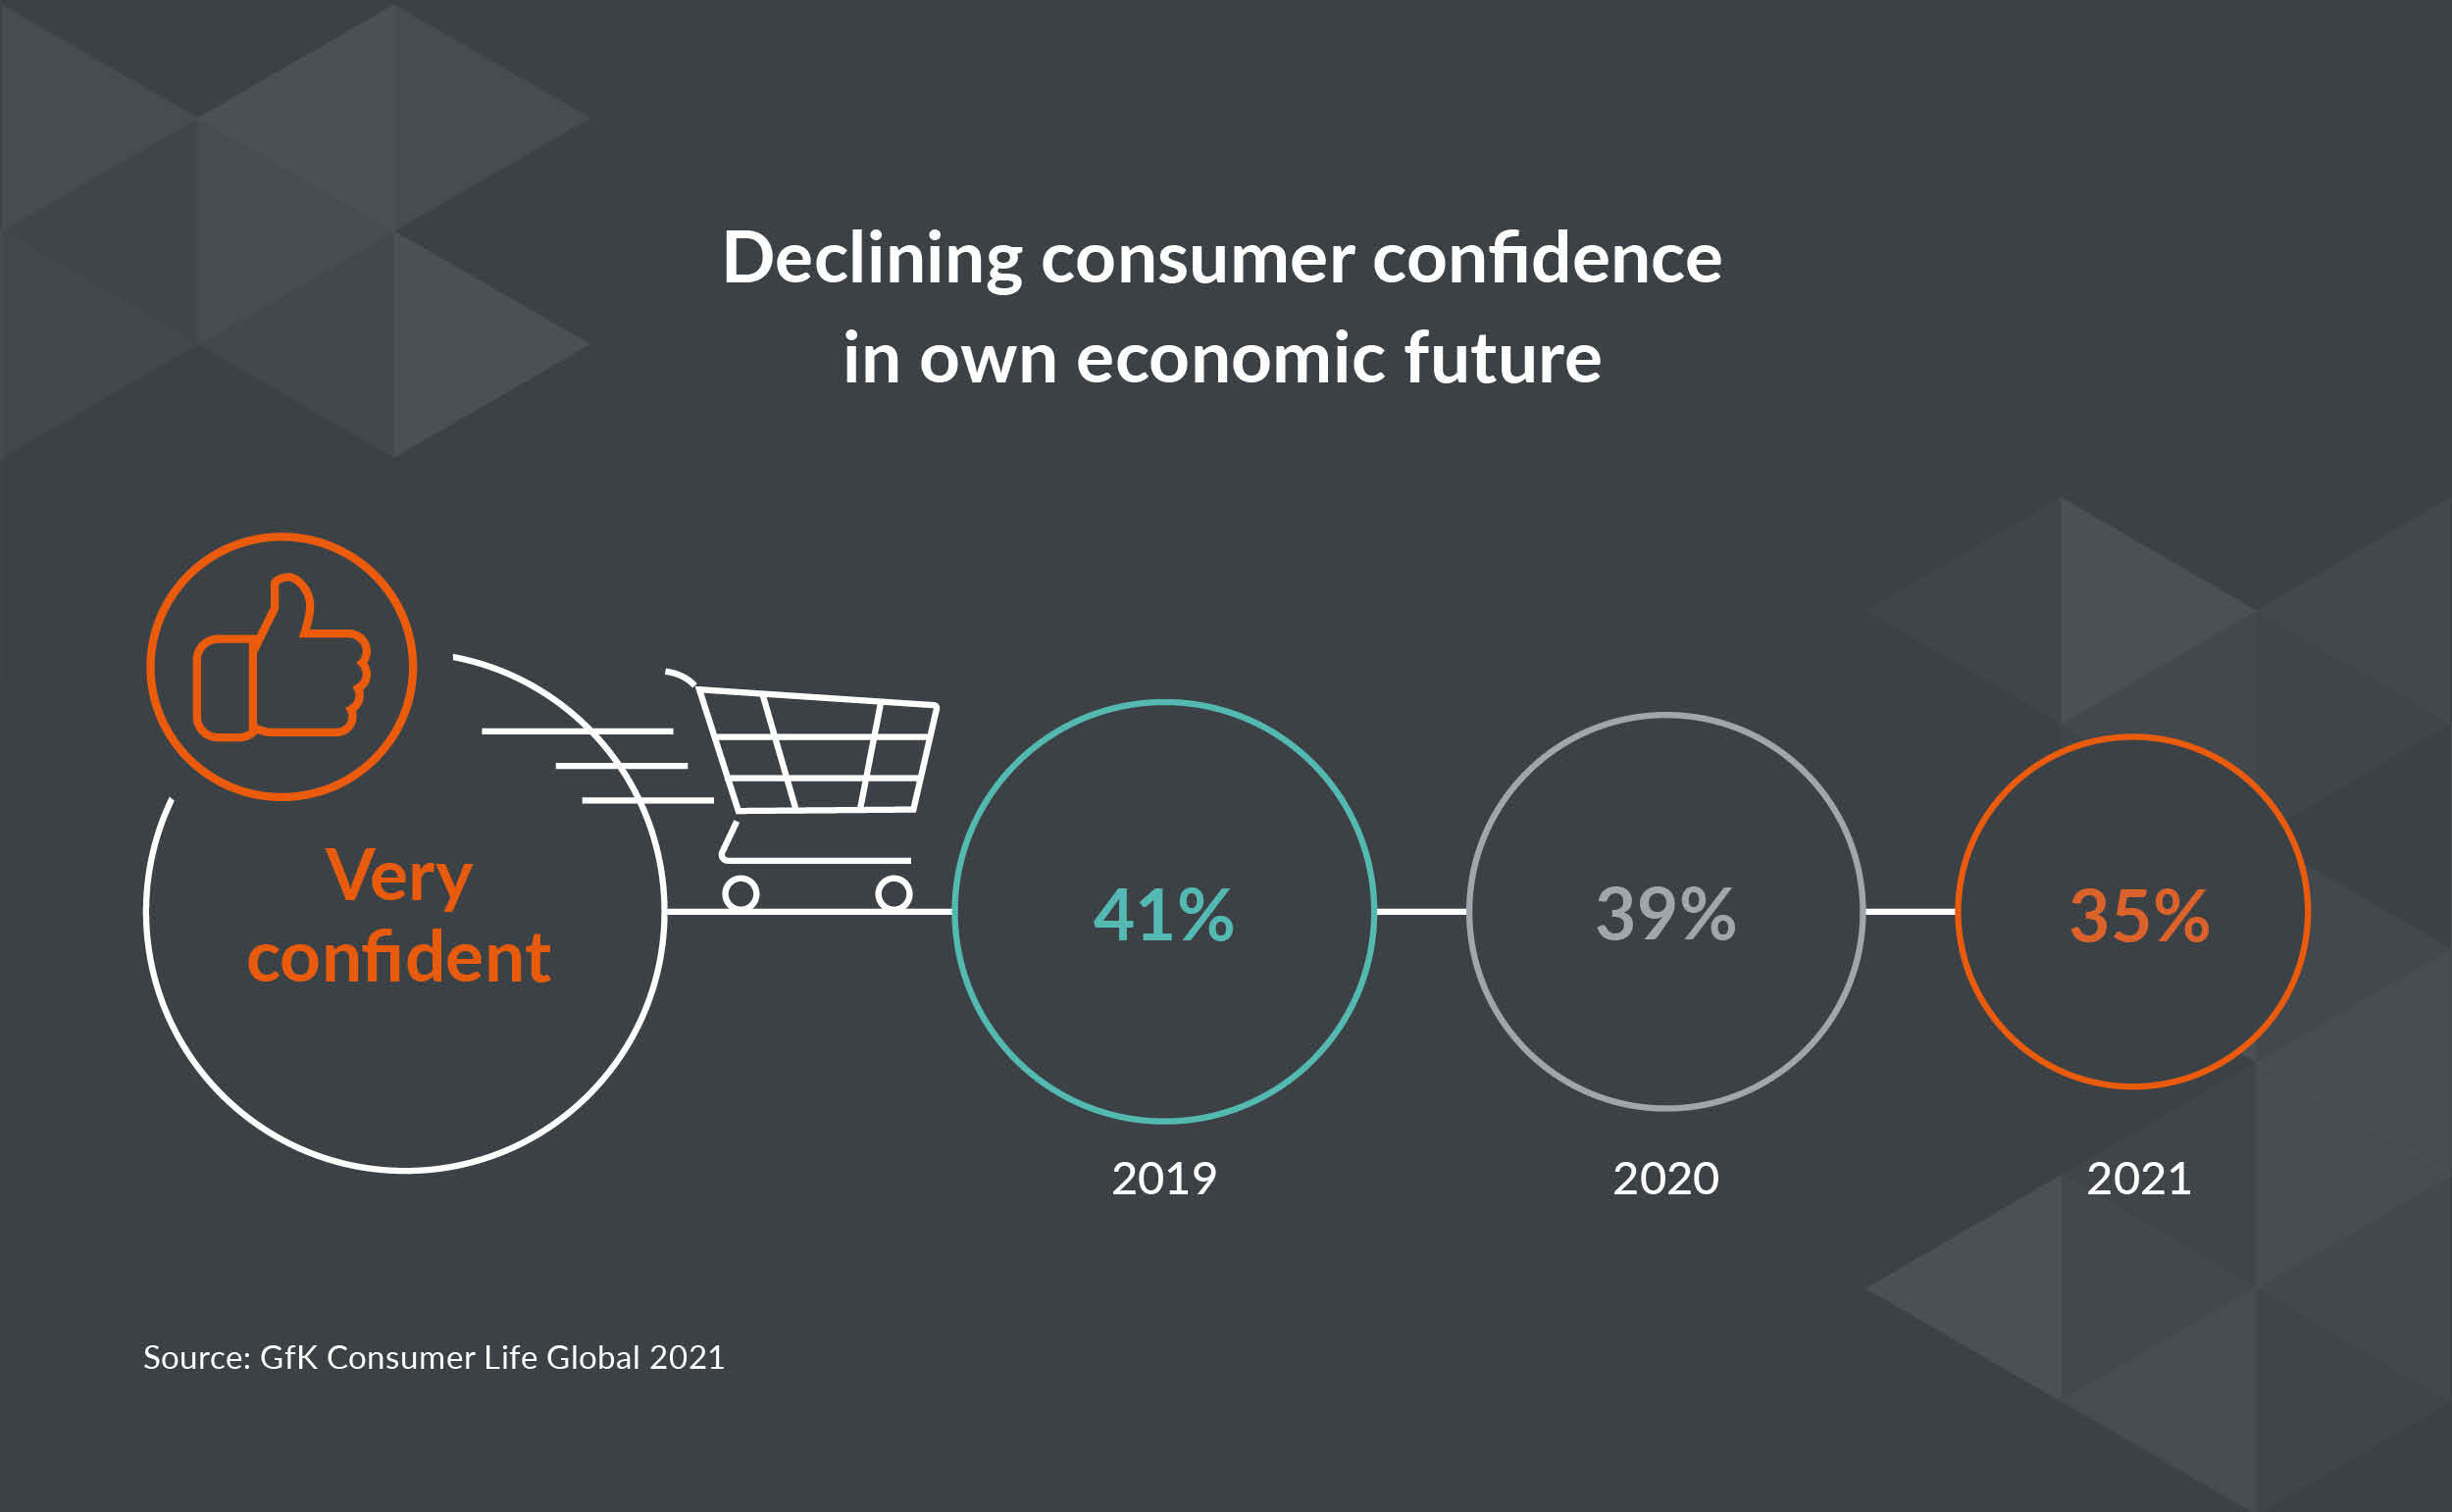 Infographic showing declining consumer confidence in own economic future